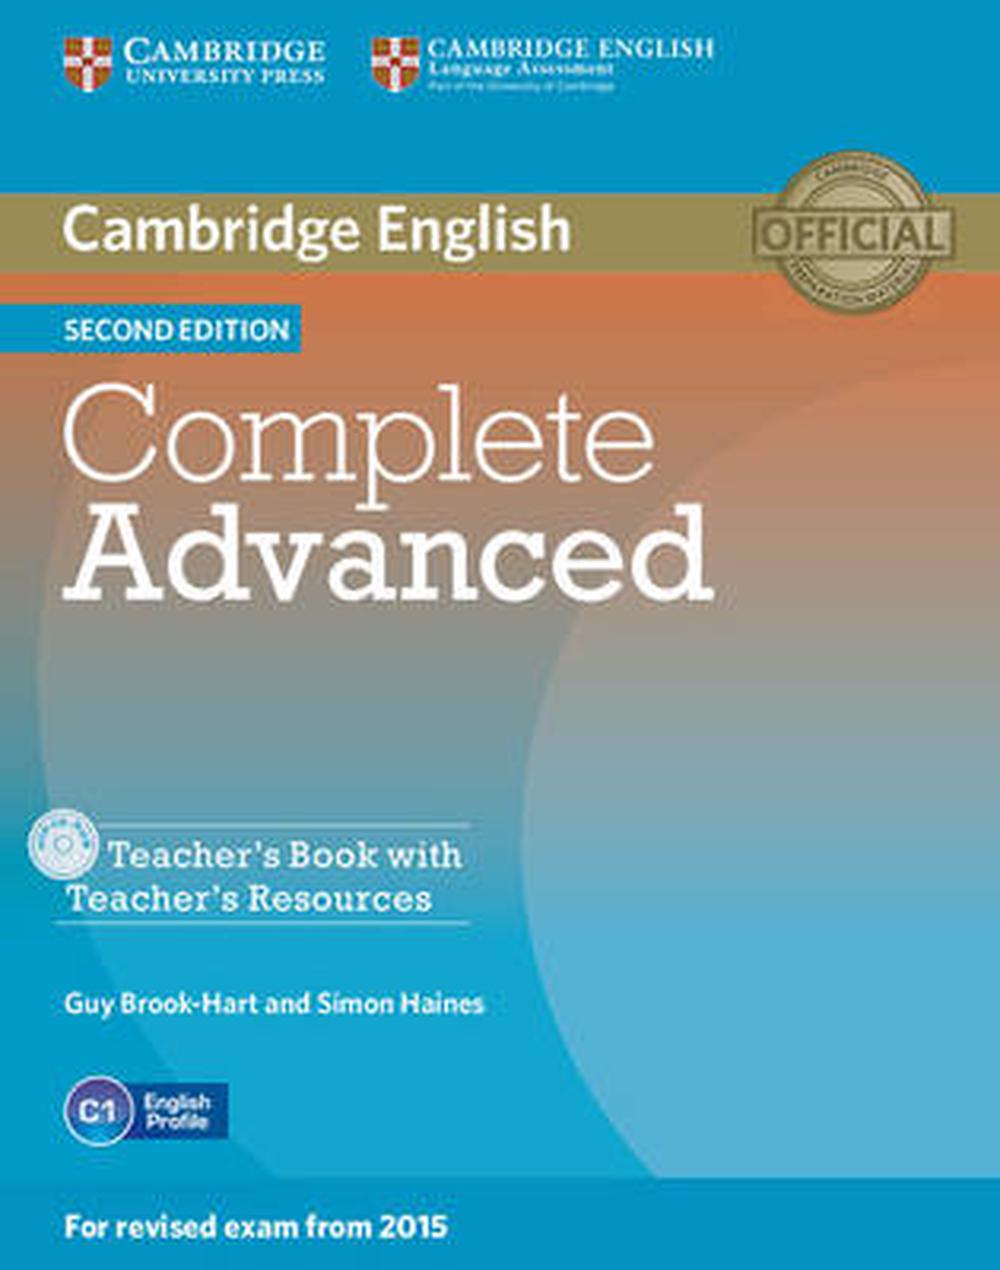 The　Teacher's　Buy　Book　Nile　Merchandise,　CD-ROM　Book　Advanced　by　Teacher's　Resources　Brook-Hart,　Guy　at　9781107698383　online　Complete　with